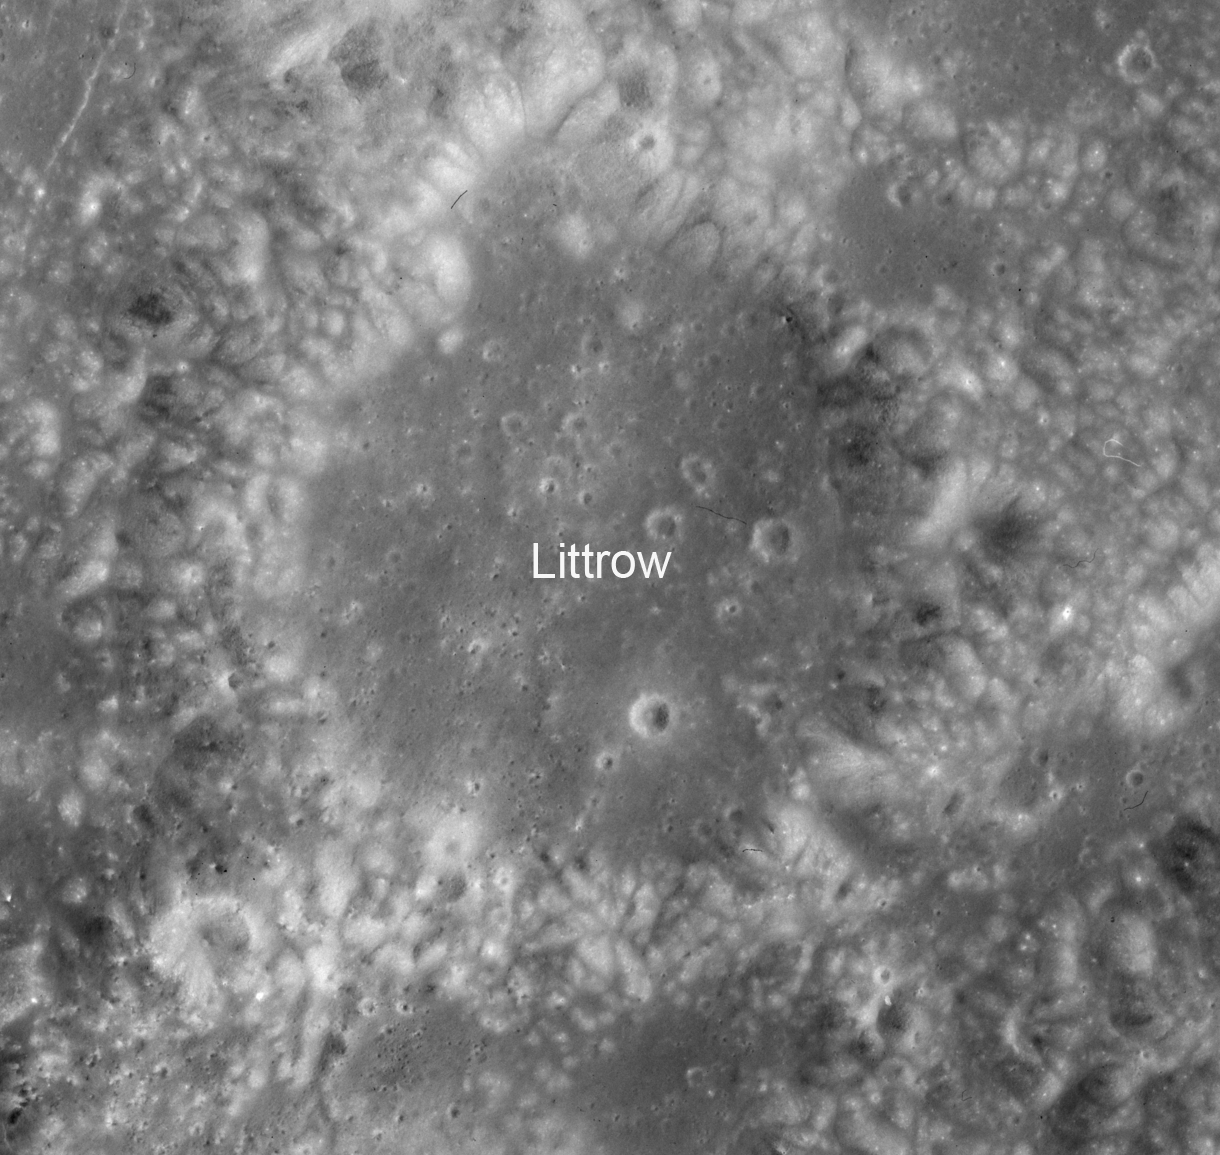 Apollo Metric image AS15-M-0565, Littrow Crater.